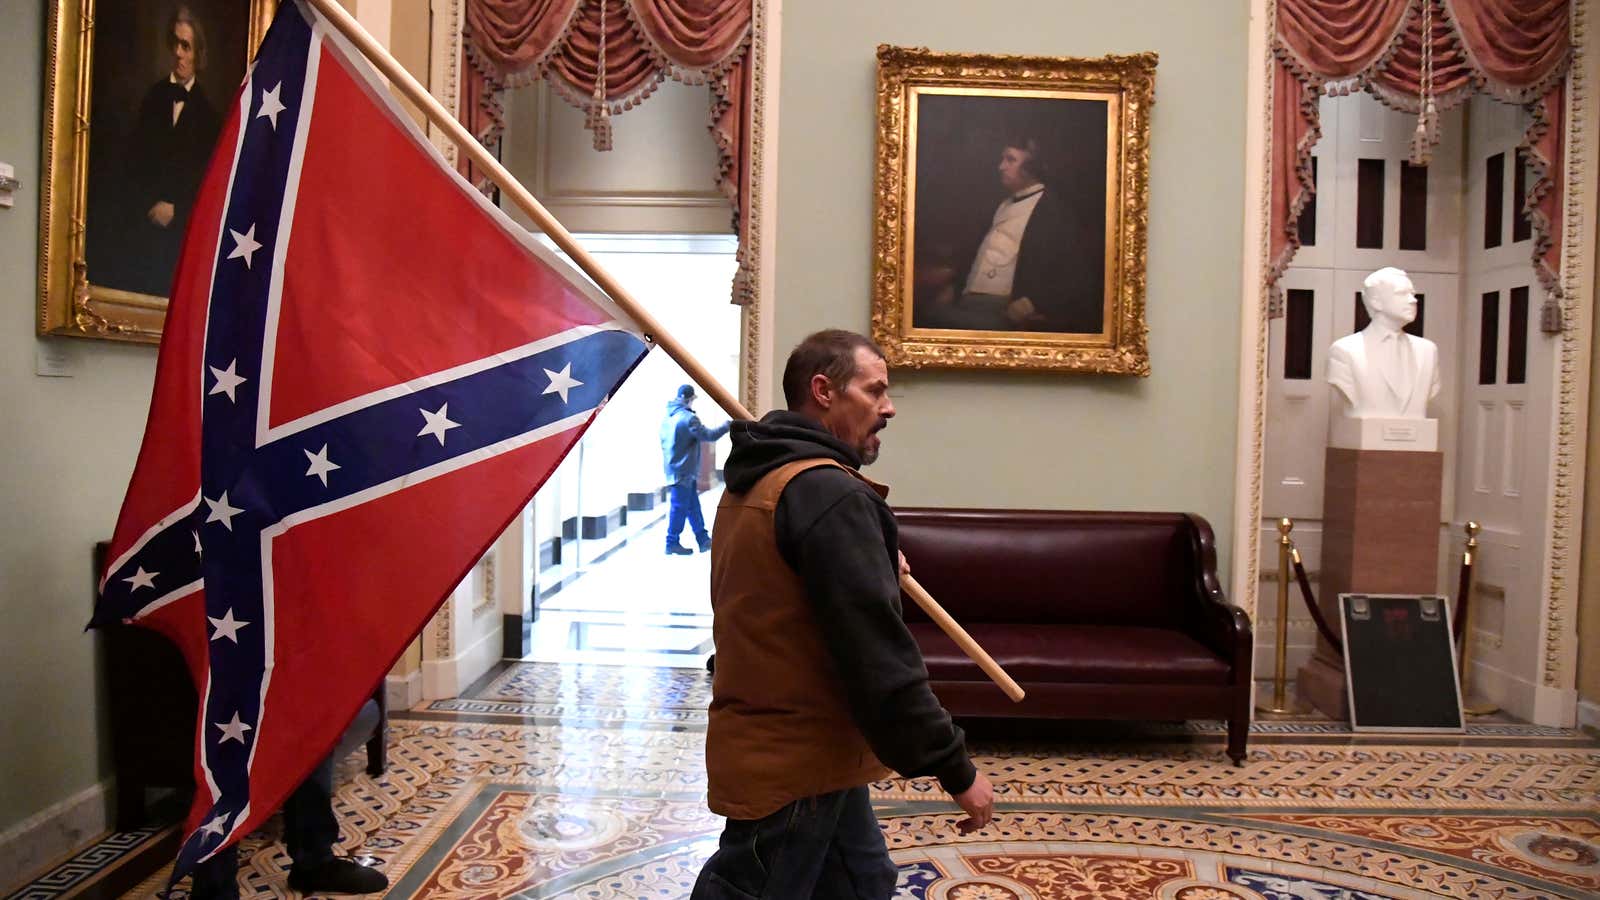 A Trump supporter carries a Confederate flag inside the US Capitol